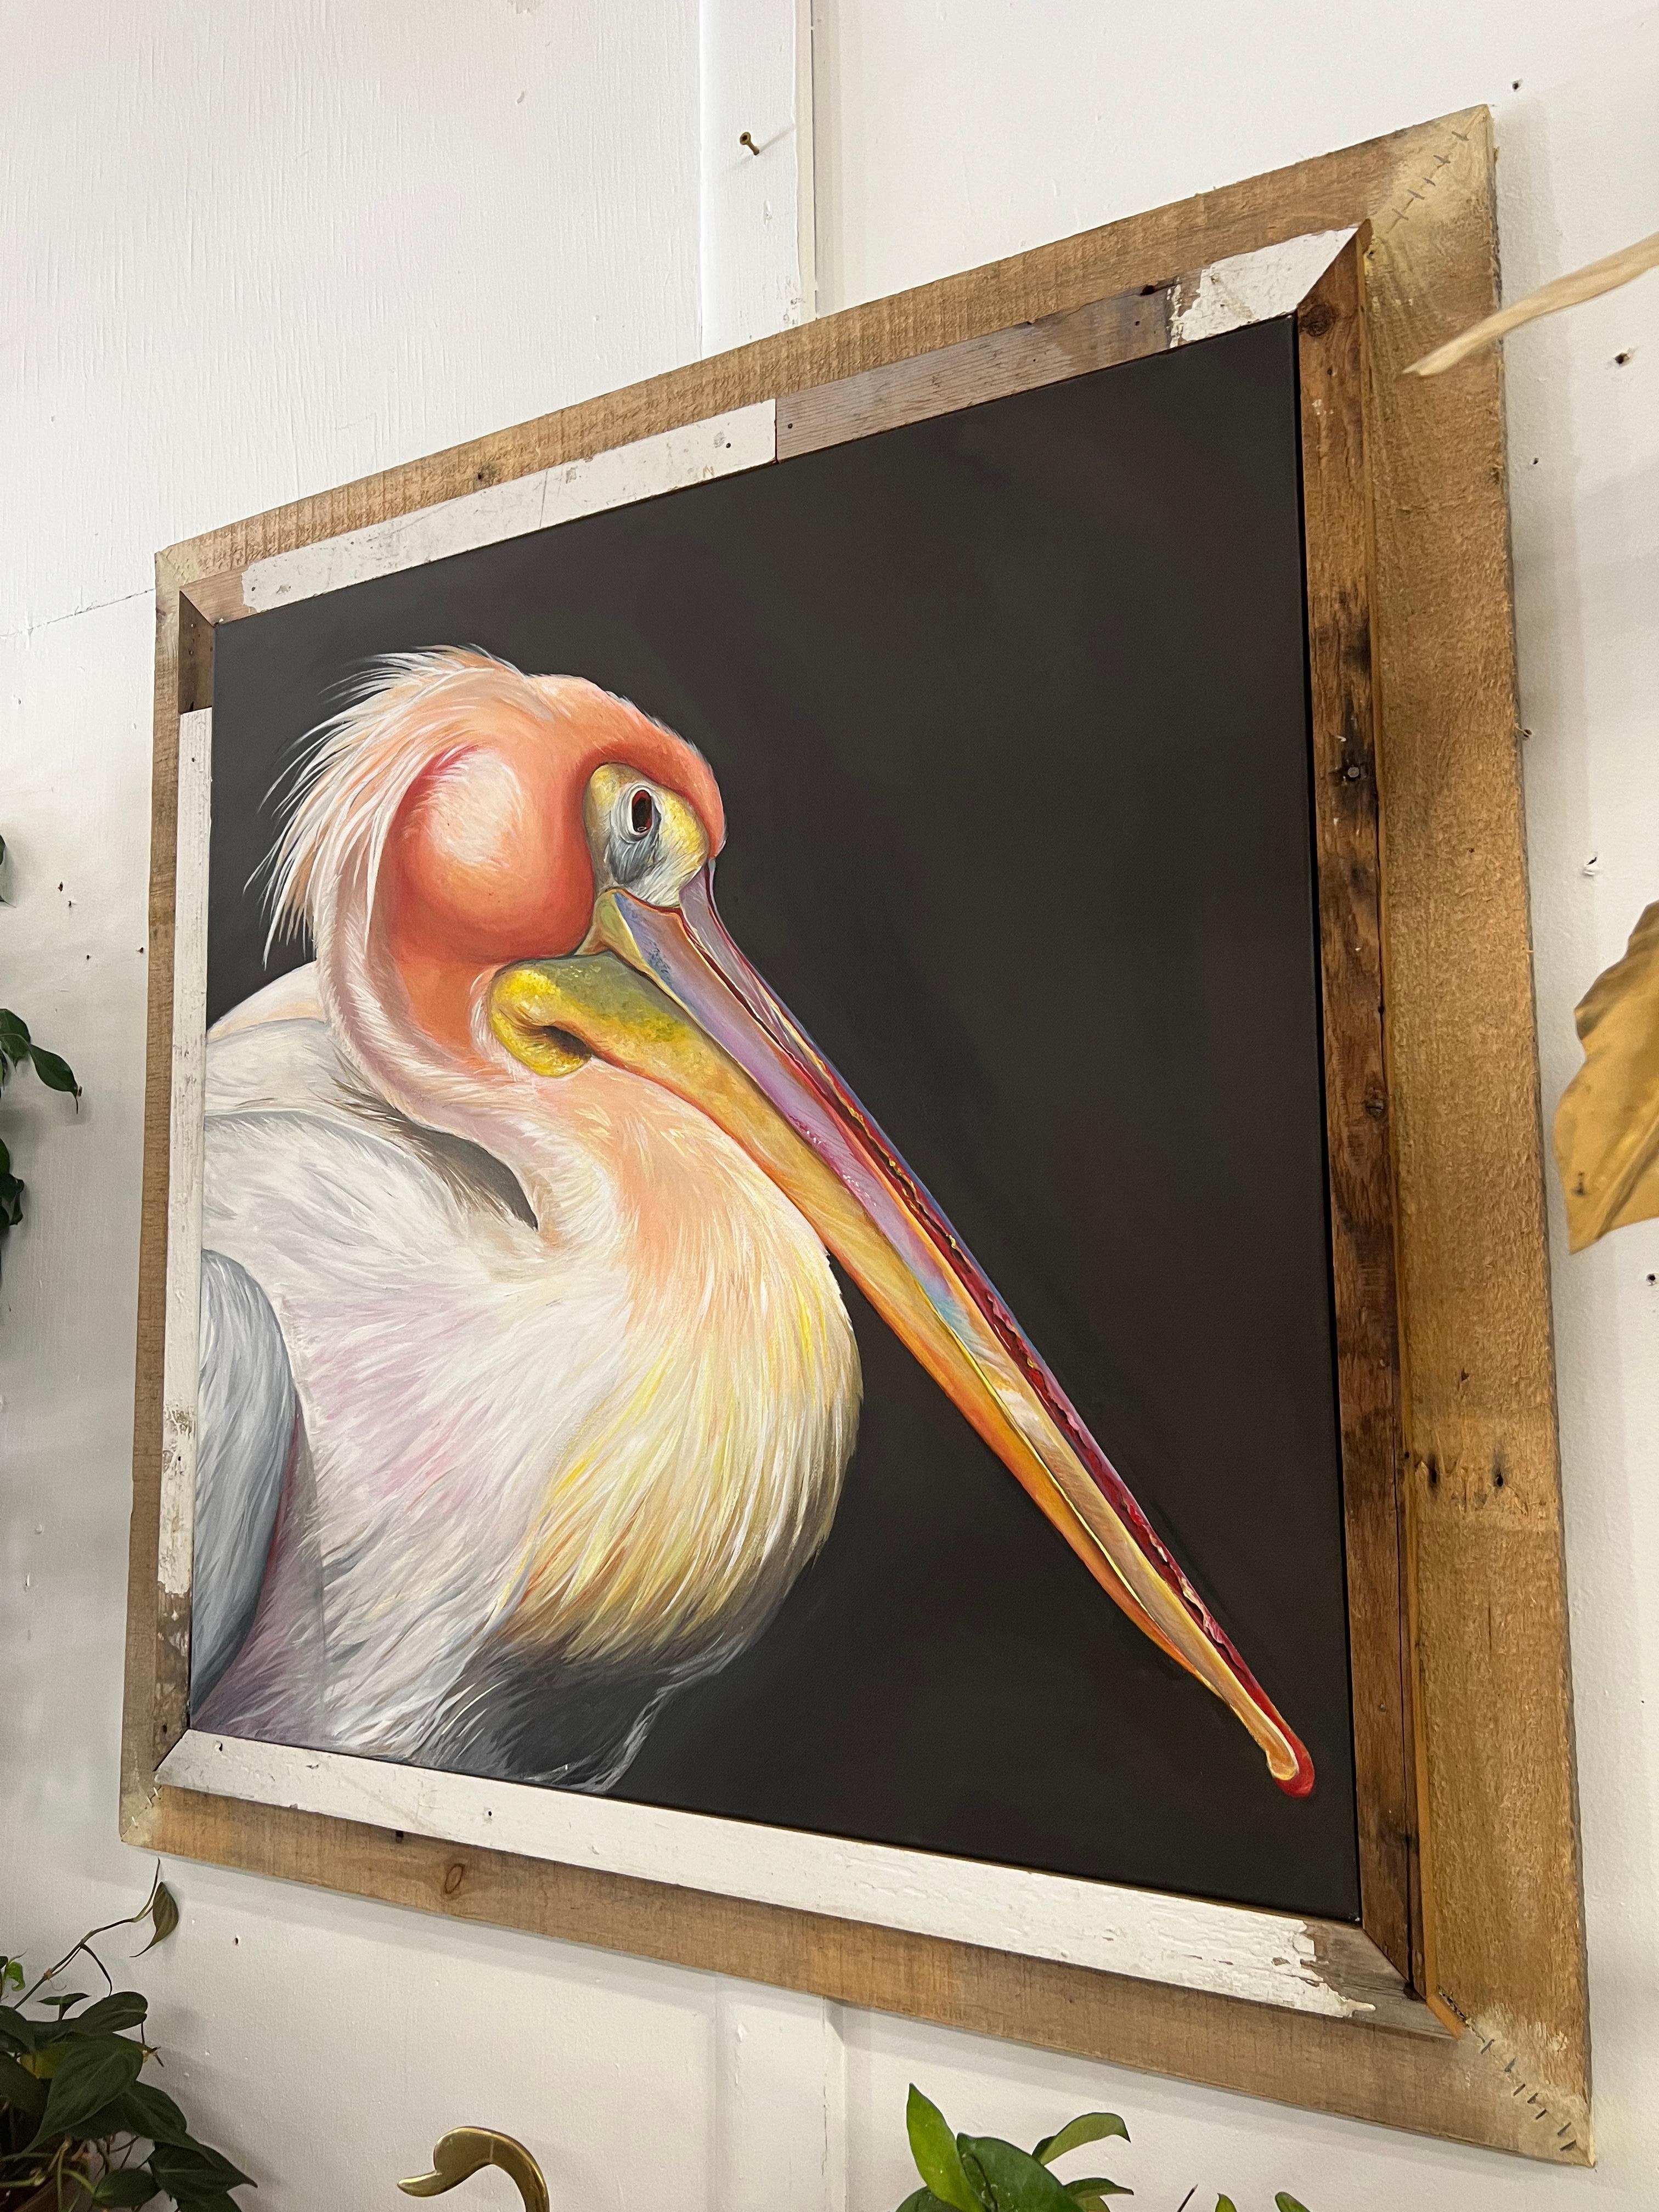 Contemporary Pelican Painting by Krystal Sokolis - Acrylics on Canvas - Reclaimed Wood Frame